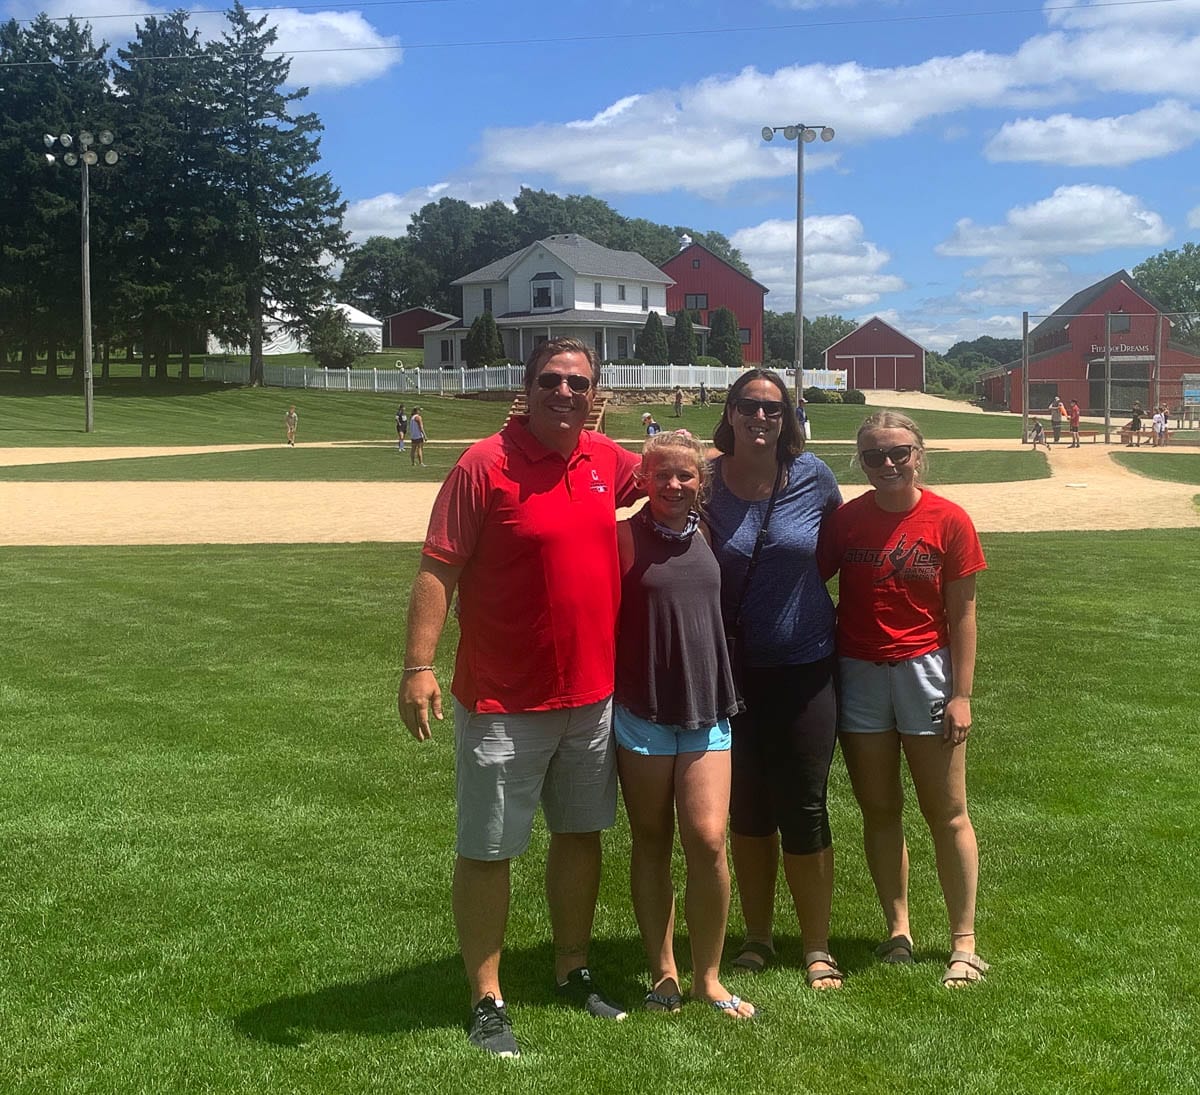 Is this heaven? No, it’s the Castro family in Iowa. The Castros, movie buffs and historians, traveled the country to seek out locales of famous movies such as this baseball field in Iowa, home of Field of Dreams. Photo courtesy of the Castro family